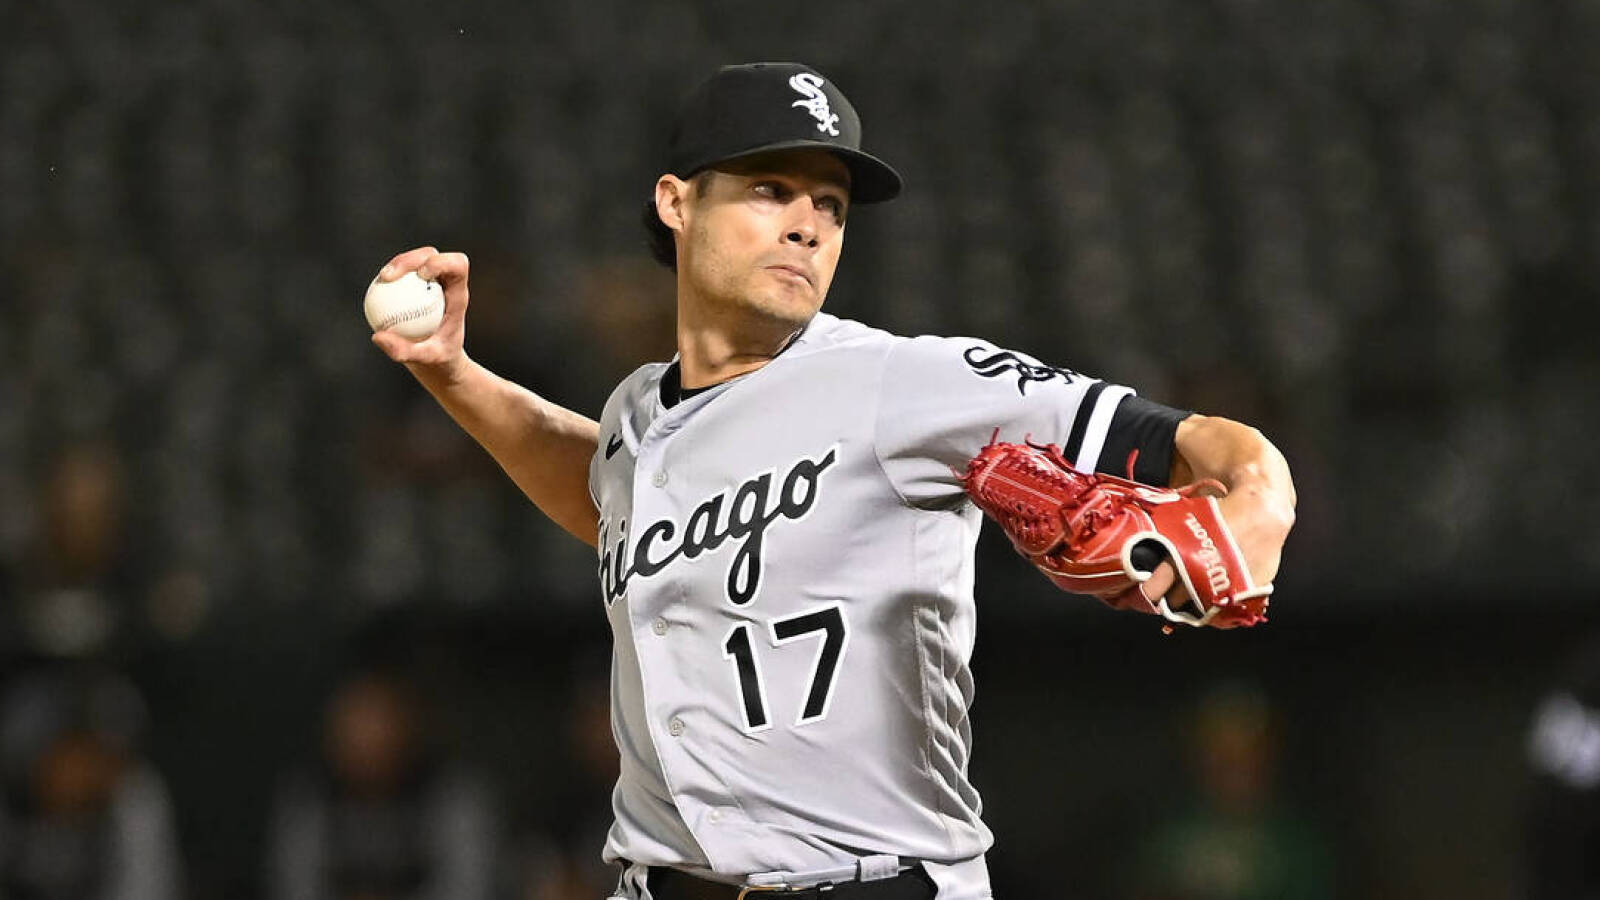 White Sox reliever Joe Kelly: Astros are 'tarnished for life' due to cheating scandal